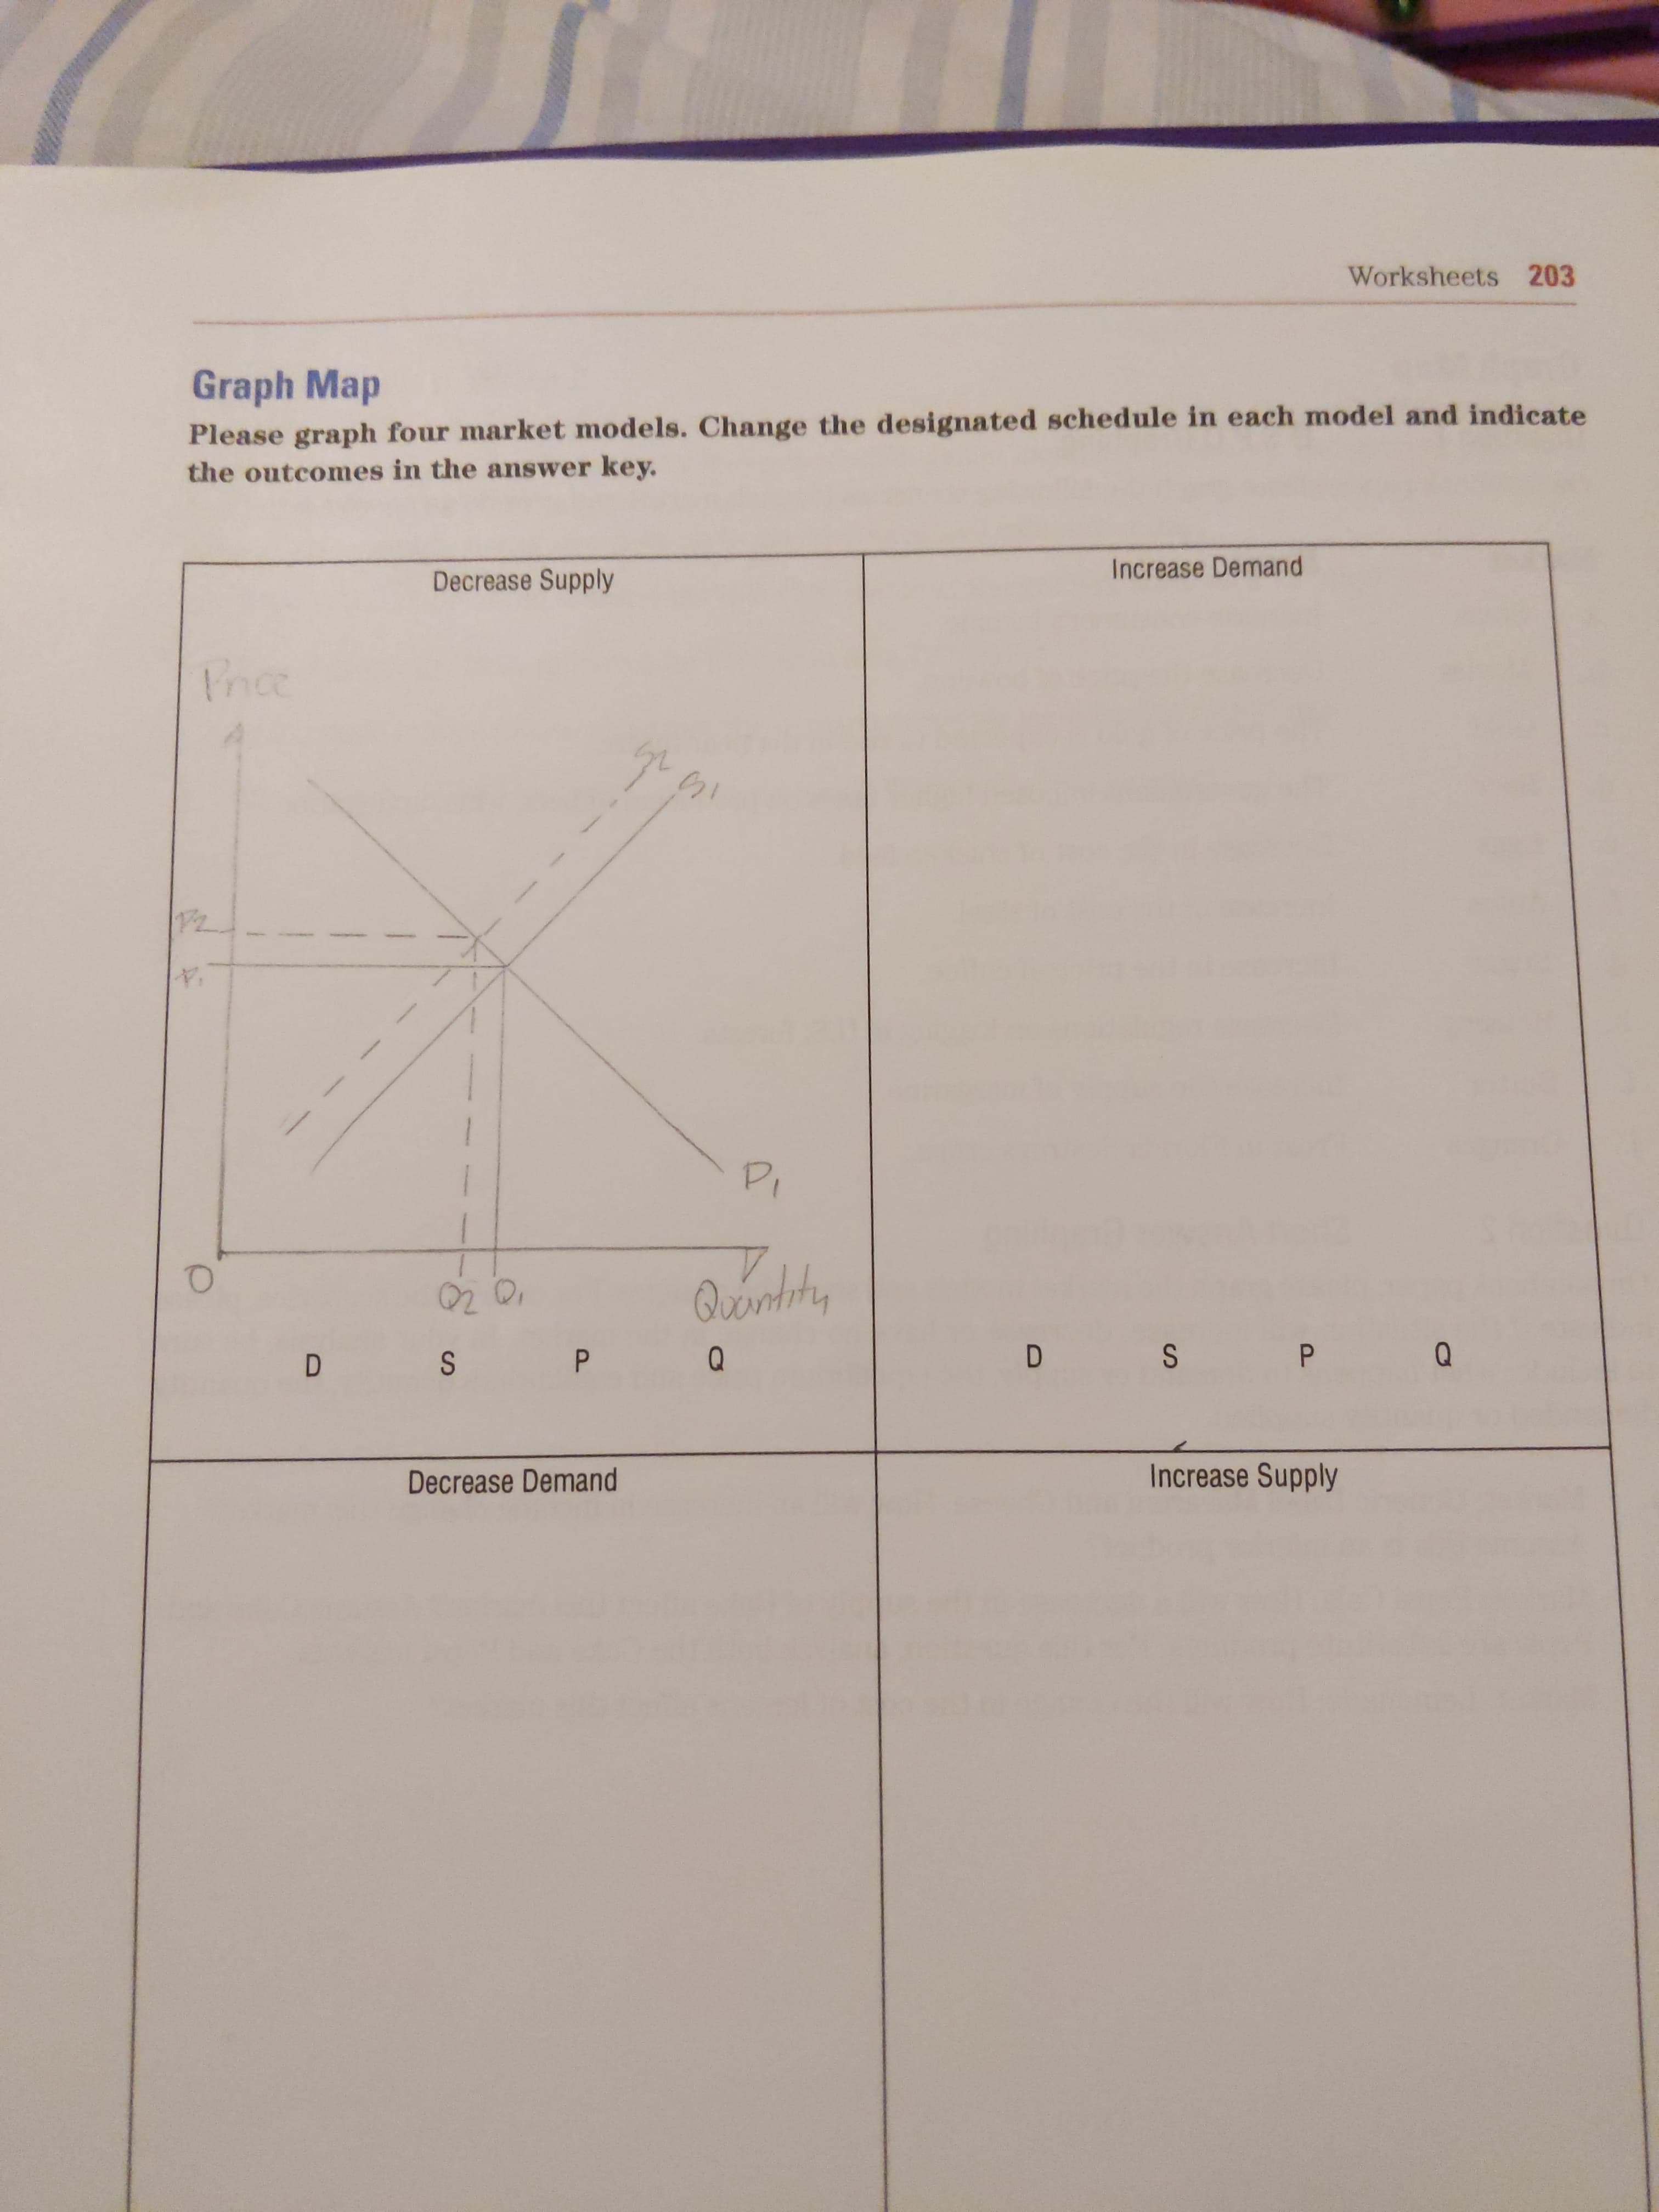 Worksheets 203
Graph Map
Please graph four market models. Change the designated schedule in each model and indicate
the outcomes in the answer key.
Decrease Supply
Increase Demand
Prce
P2
Pi
Quntity
D S
P.
Decrease Demand
Increase Supply
P.
S4
